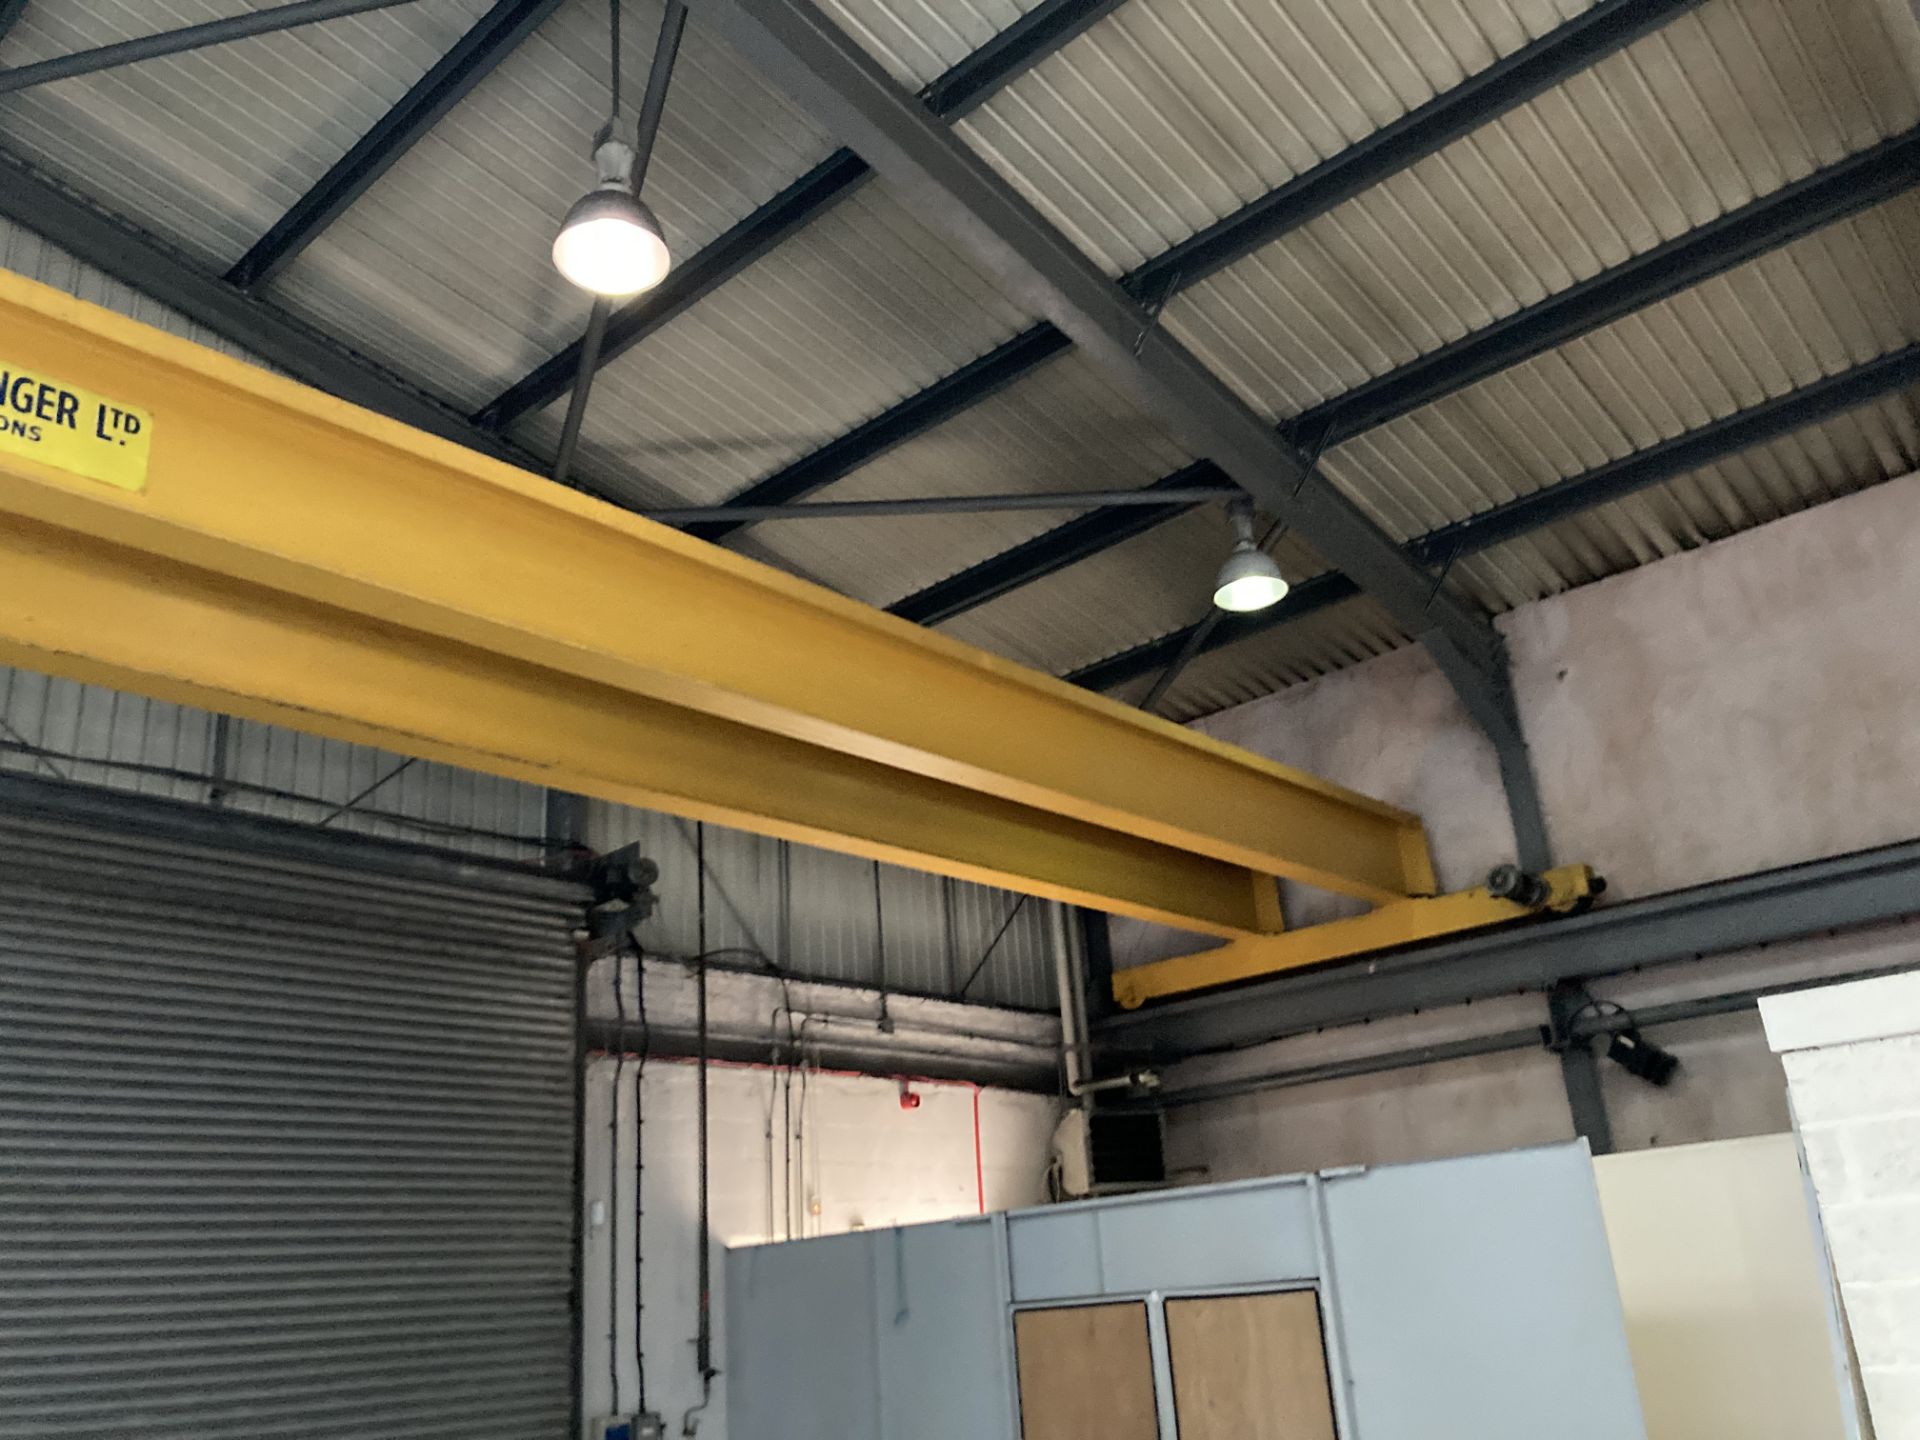 Fellows-Stringer 5 TON TWIN GIRDER OVERHEAD TRAVELLING CRANE, approx. width of crane – 19.11m x - Image 6 of 9